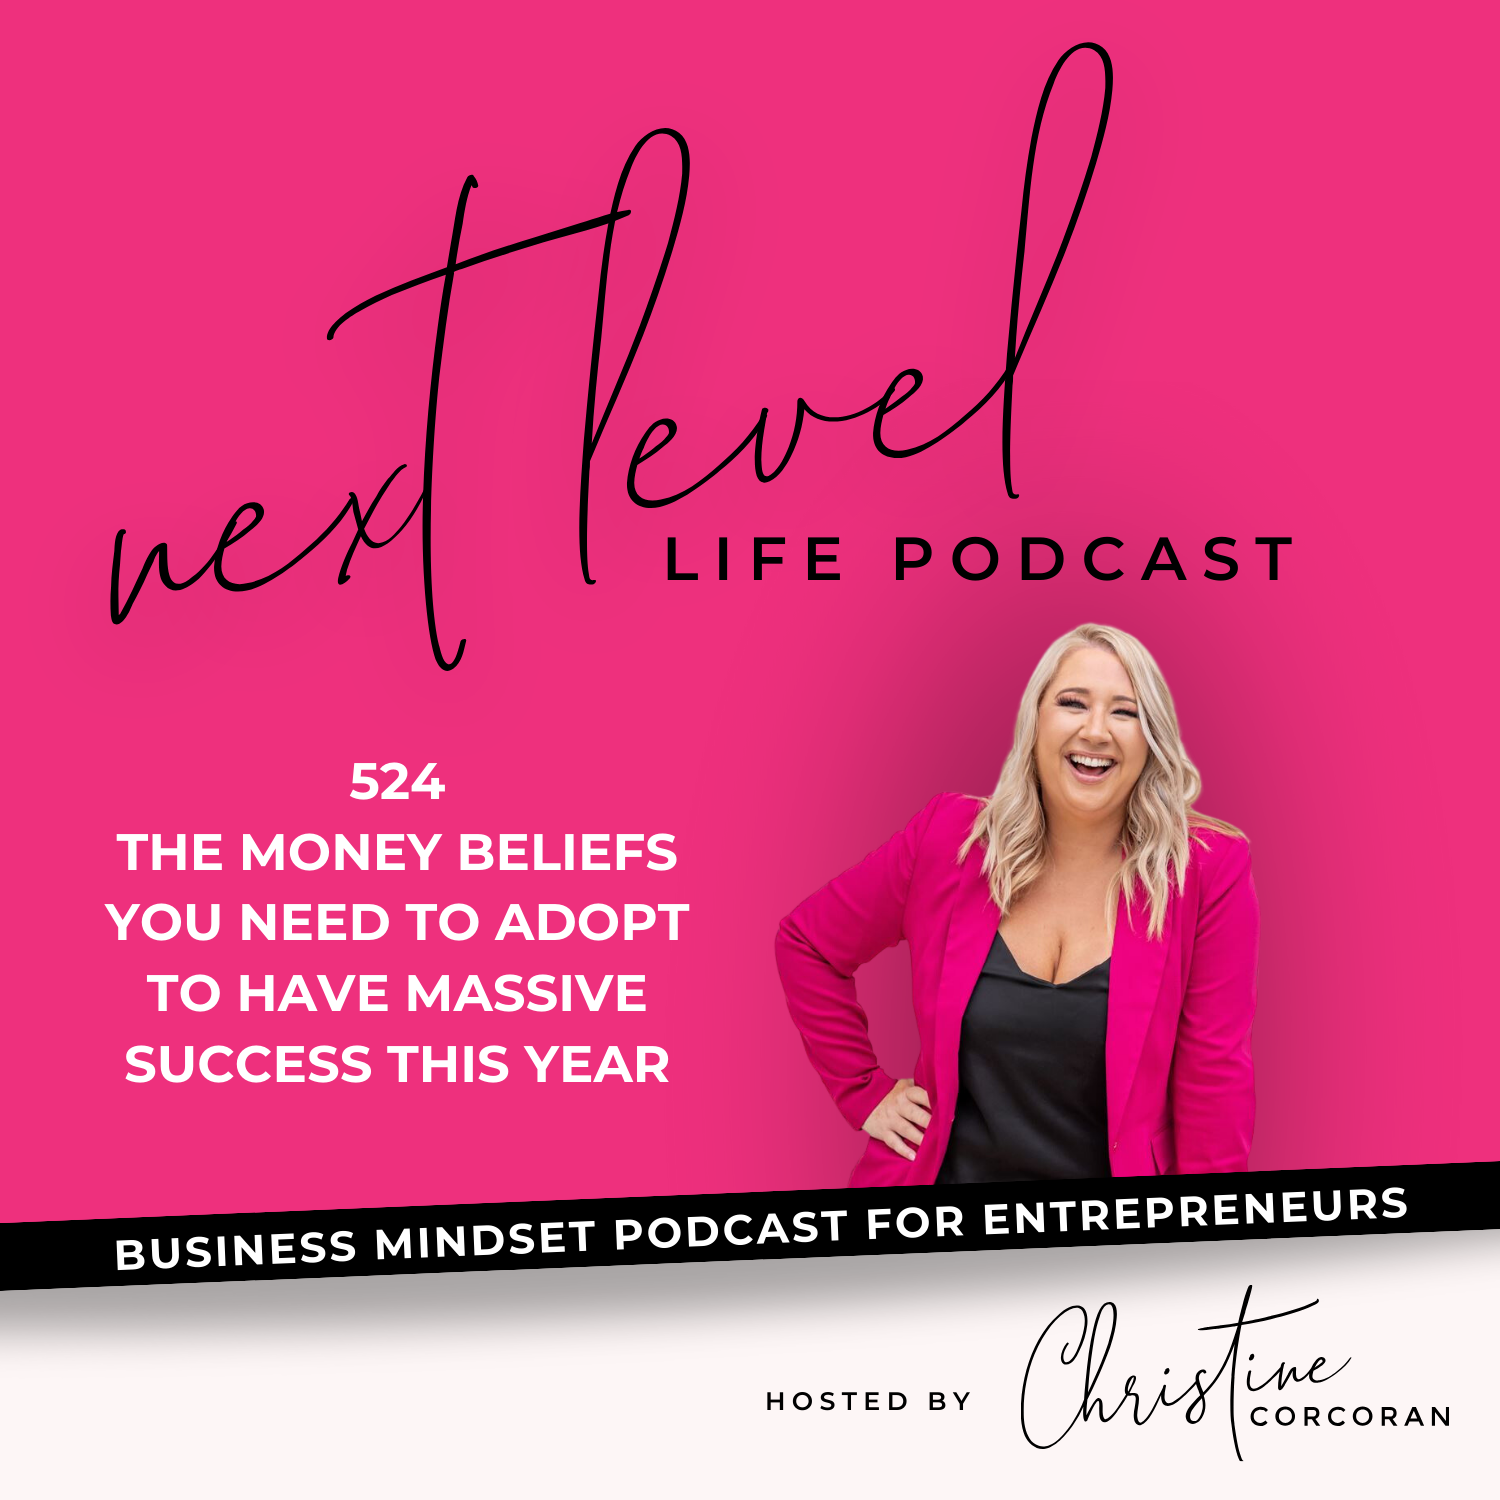 The Next Level Life Podcast 